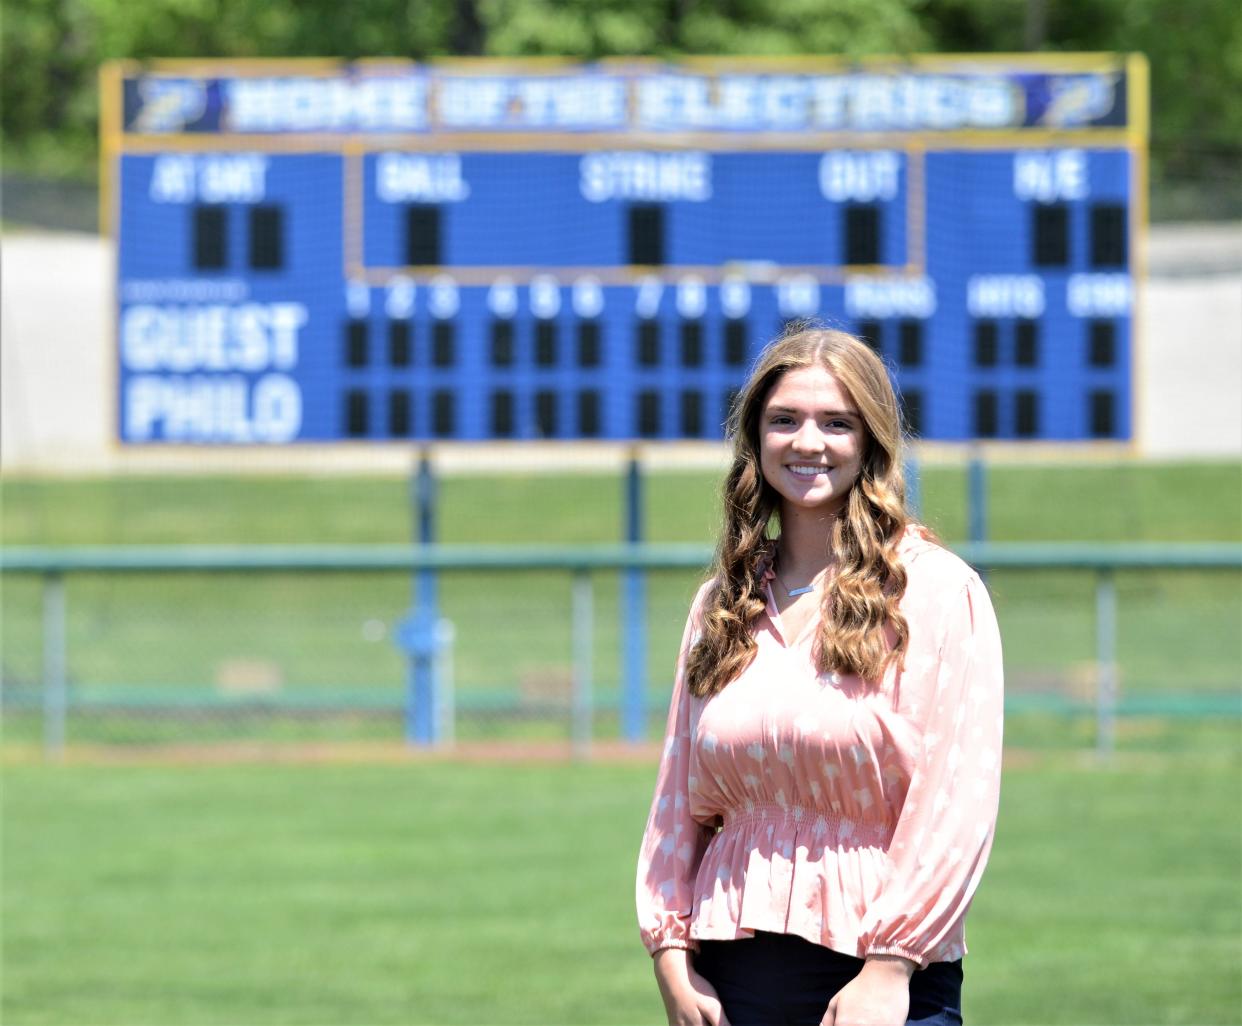 Philo senior Zoe Dodson faced adversity during her high school athletic career. Yet, those setbacks also provided new perspectives for Dodson, who will study nursing at Muskingum University.